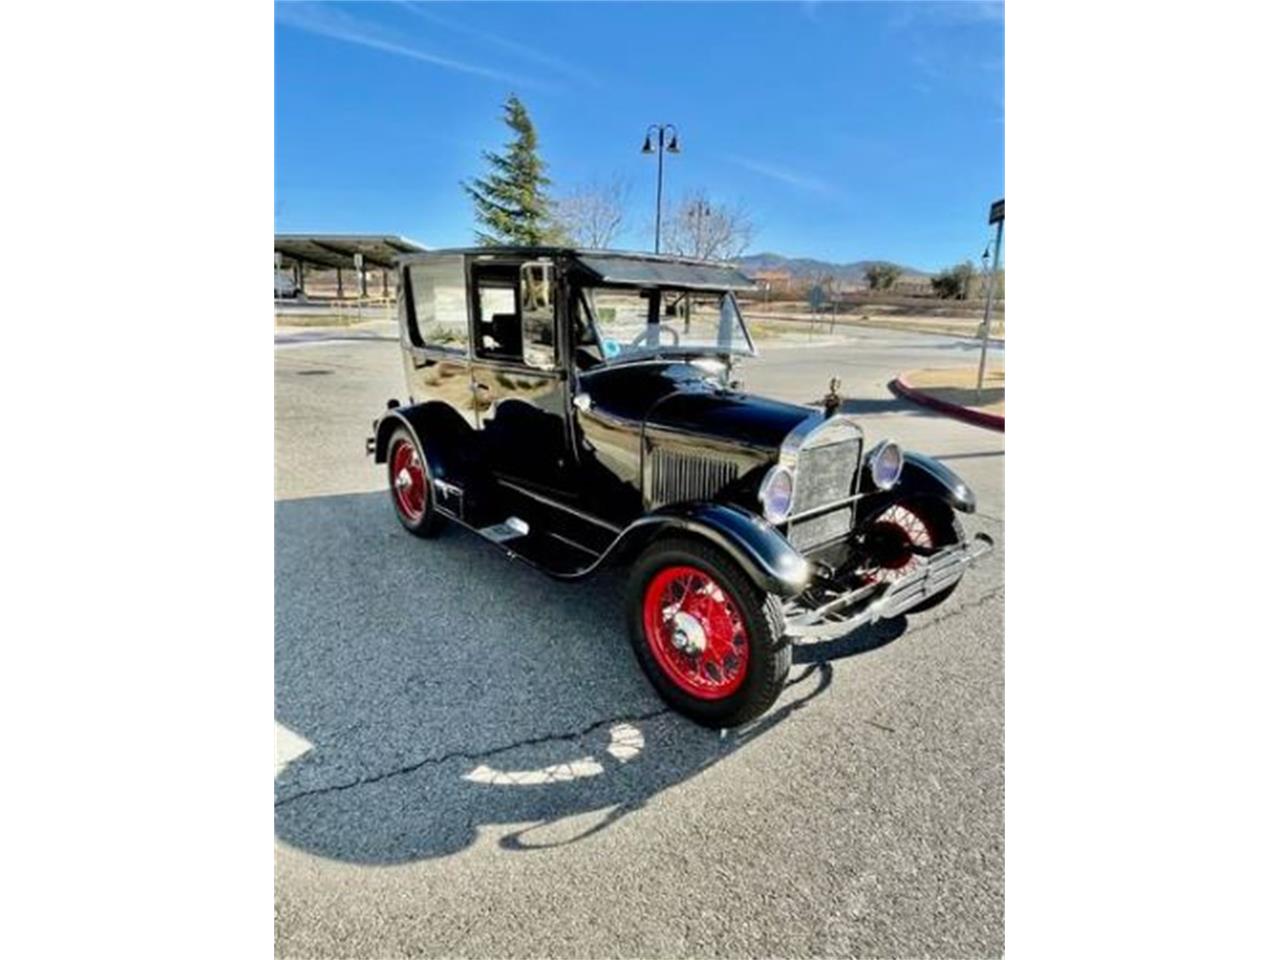 For Sale: 1926 Ford Model T in Cadillac, Michigan for sale in Cadillac, MI